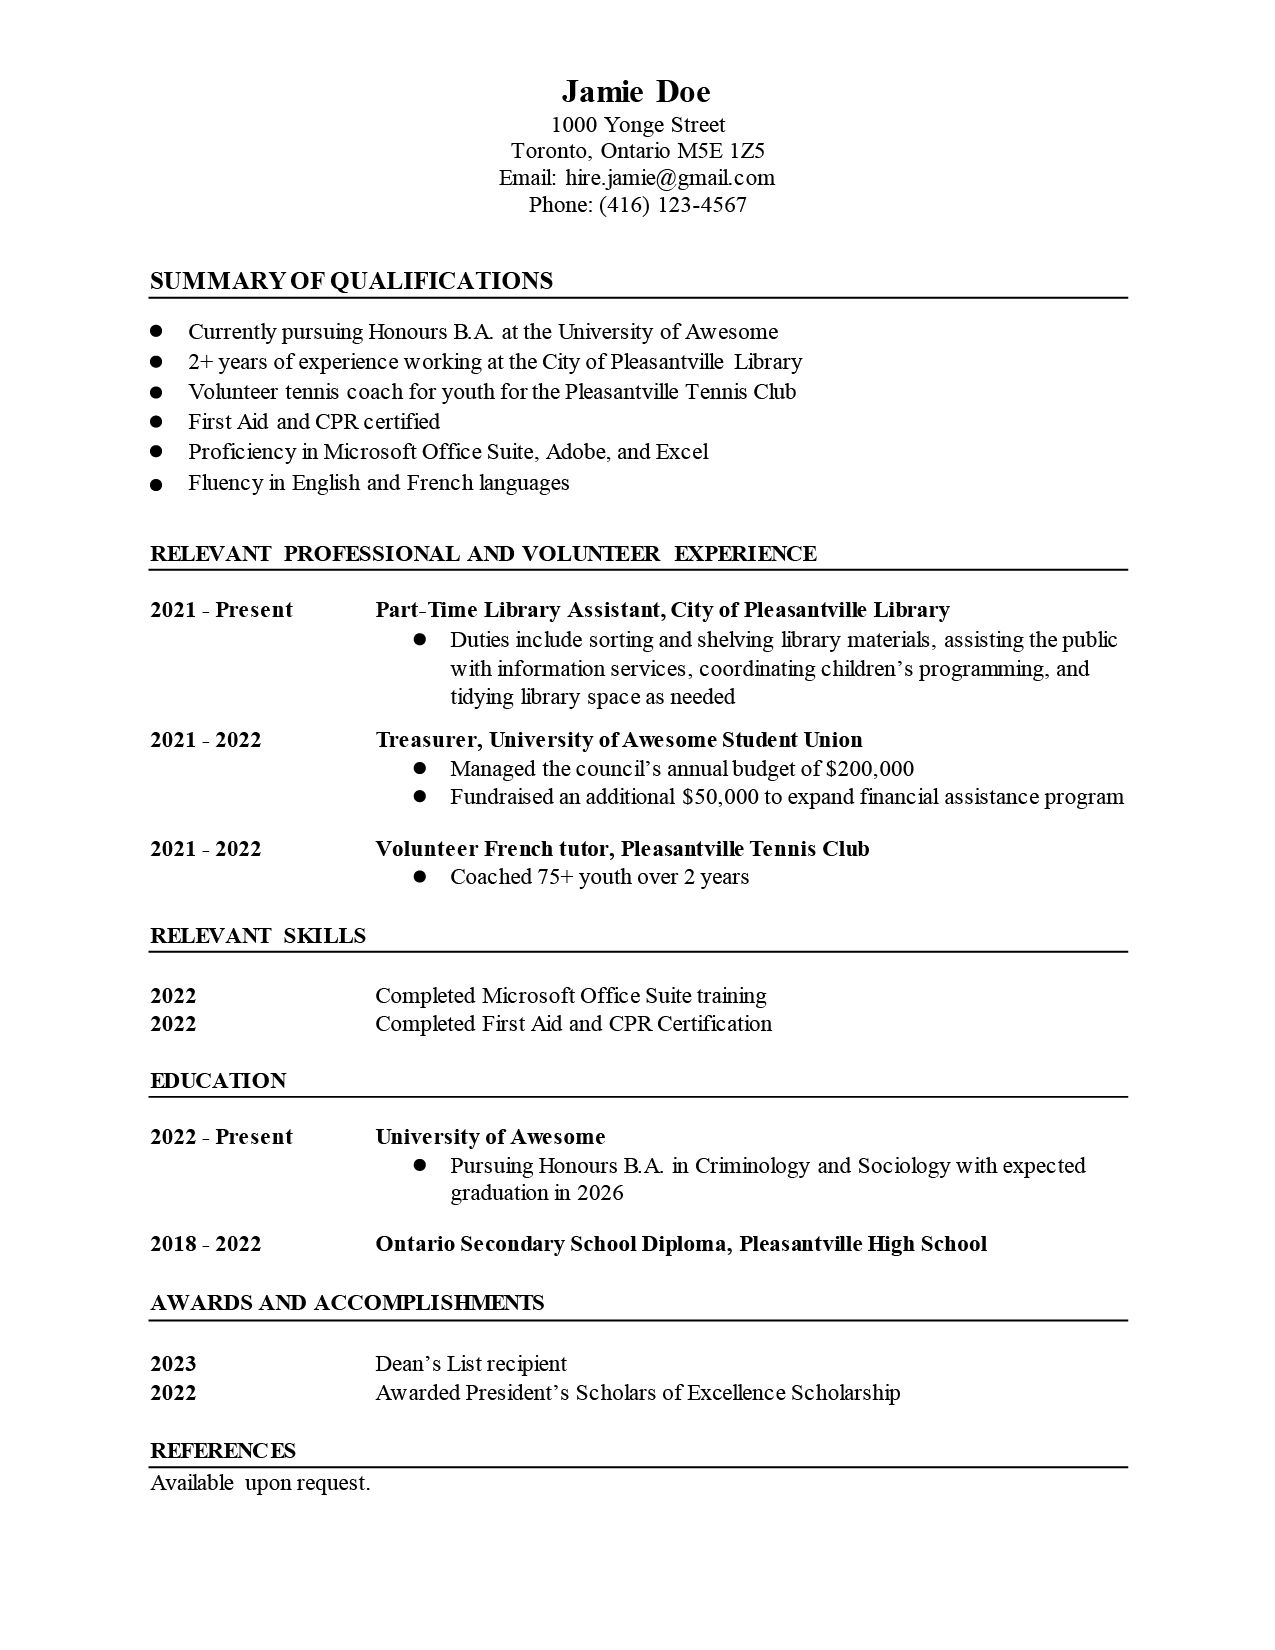 create a resume 17 year old